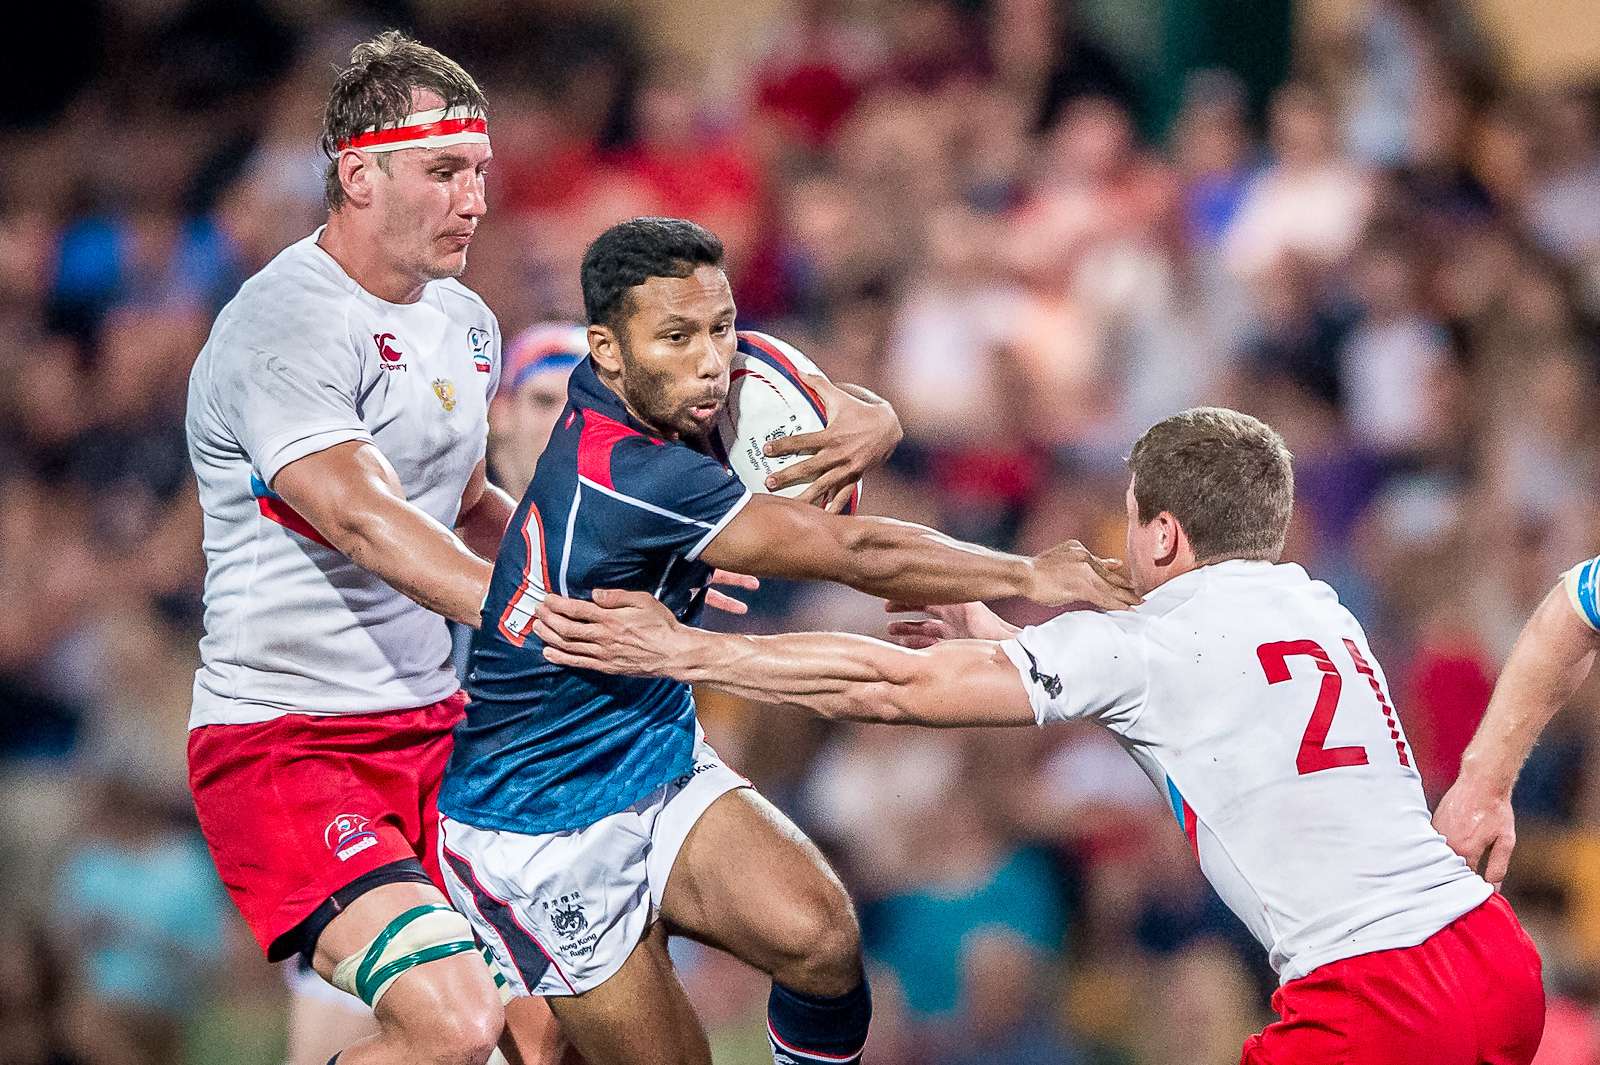 Up and coming Hong Kong scrum half Jason Jeyam attacks against Russia in the Cup of Nations. Photos: SCMP Pictures